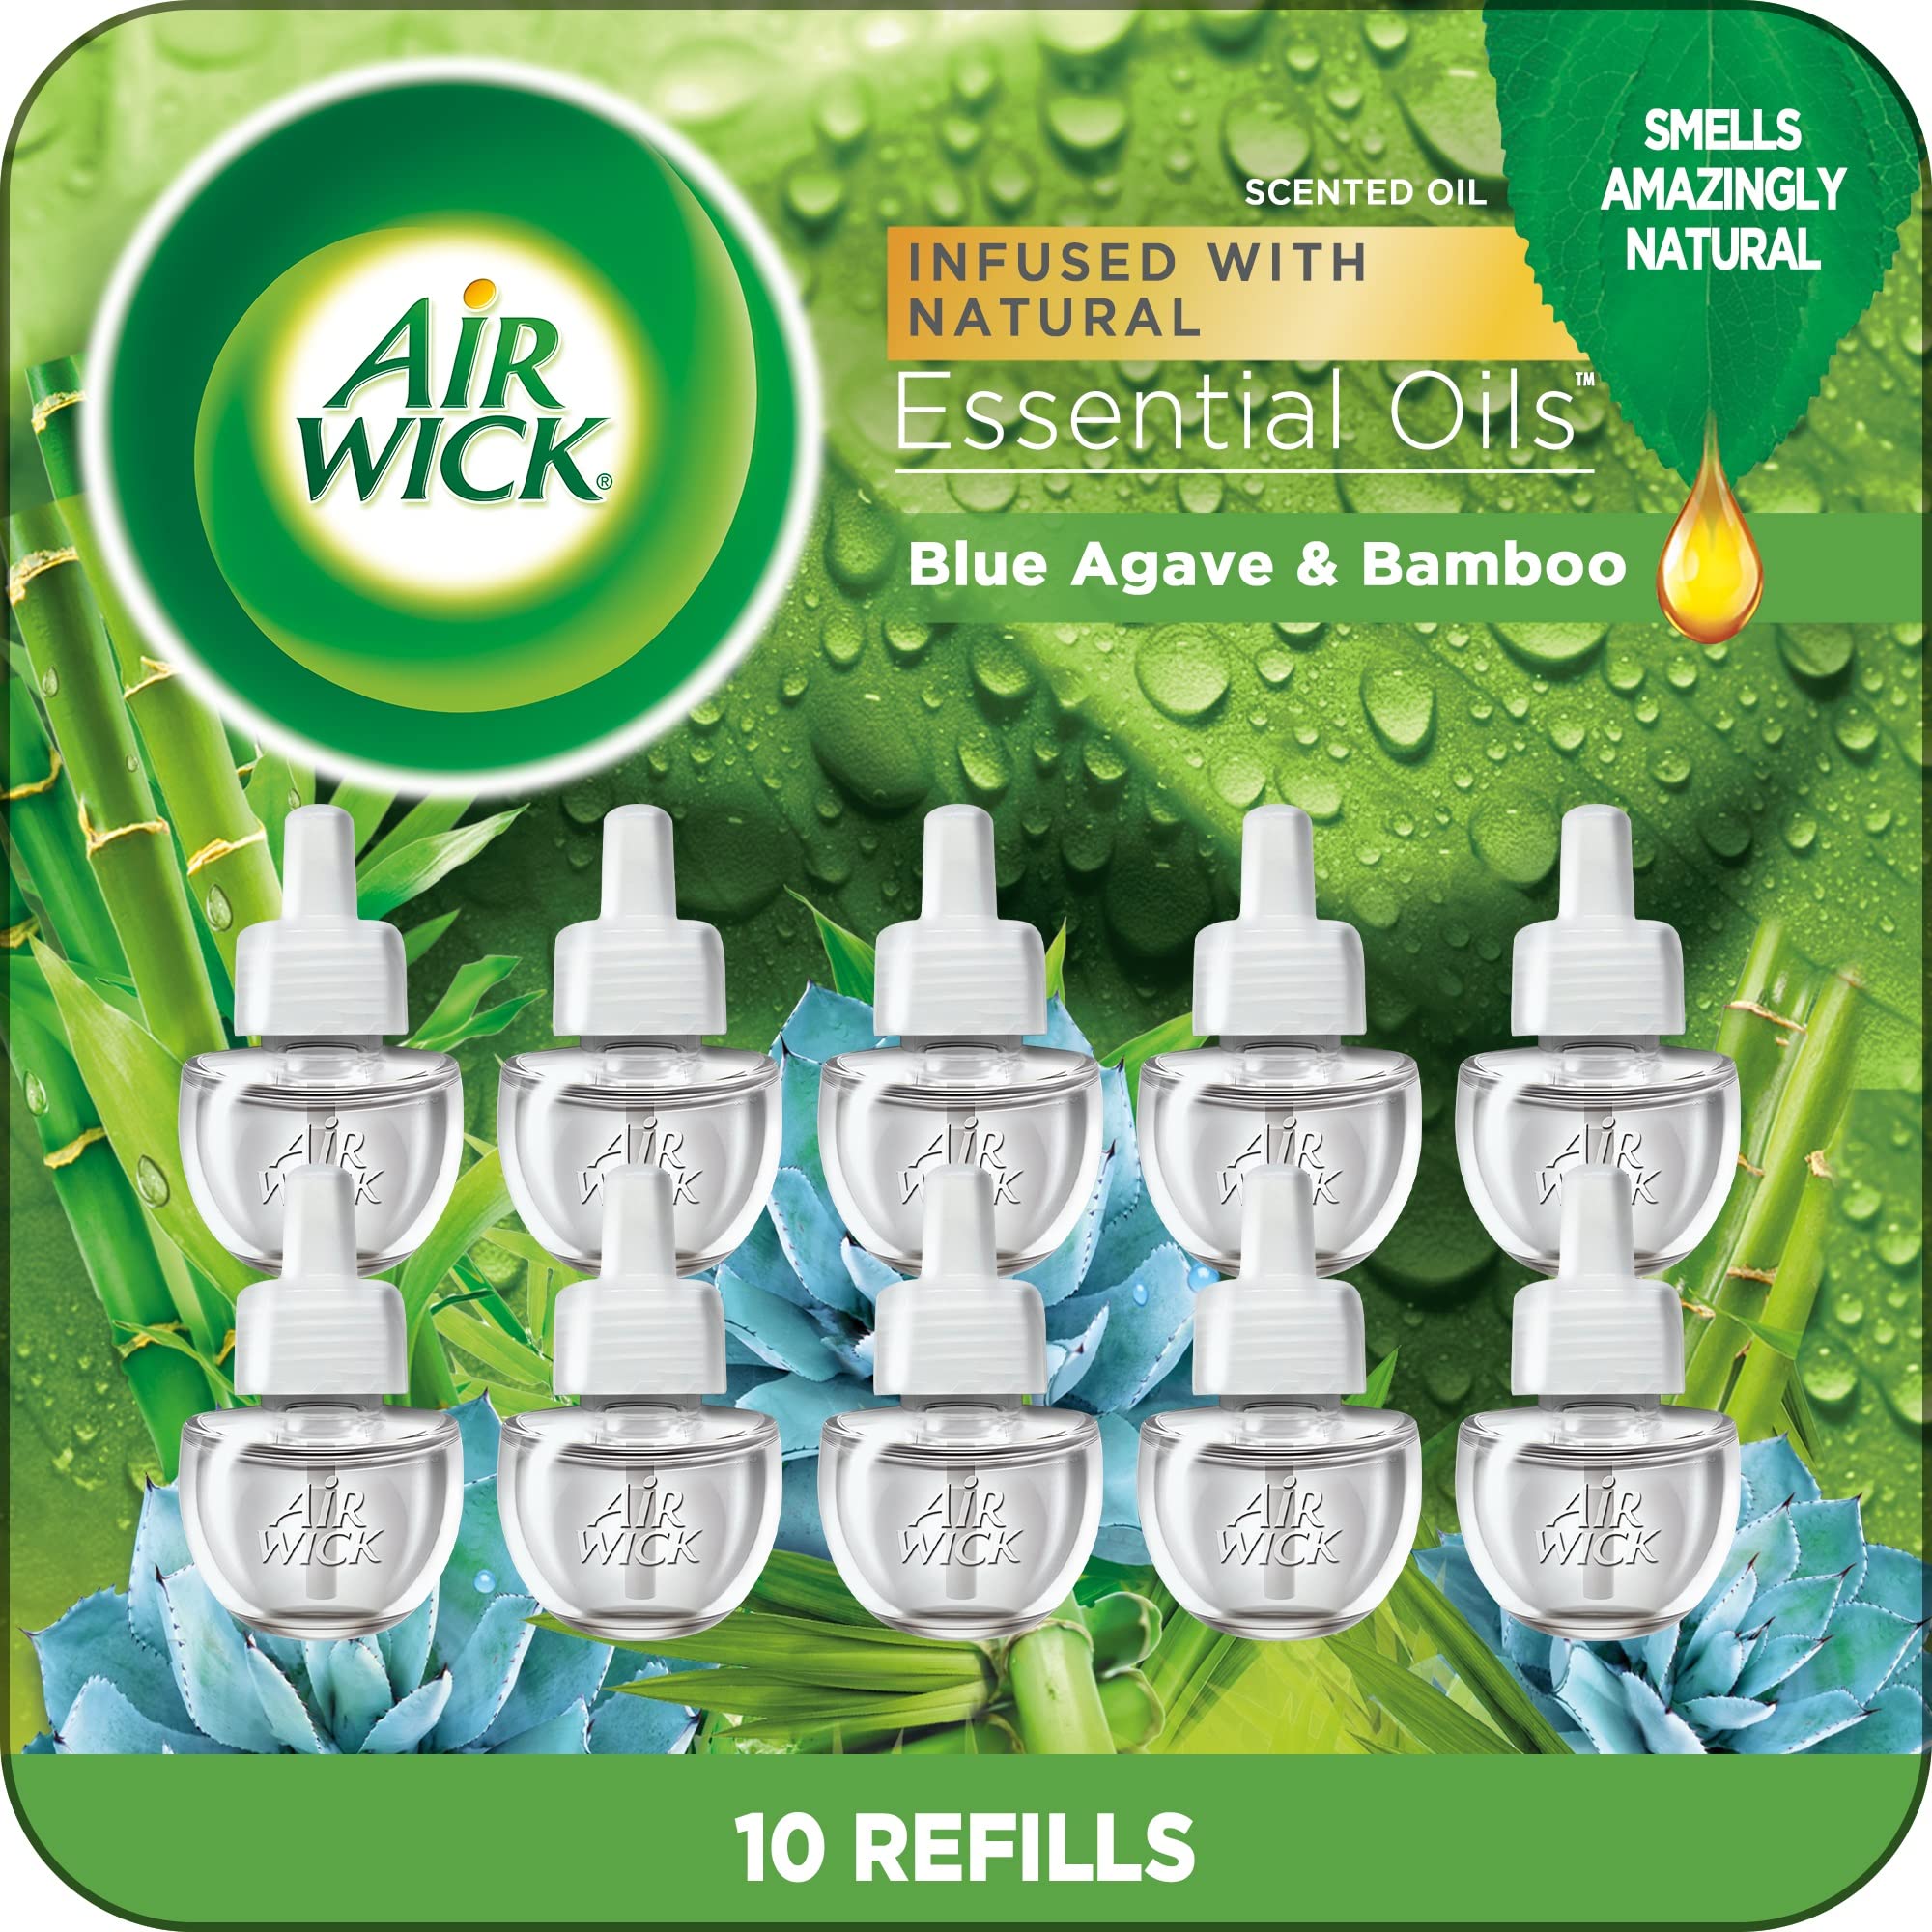 Air Wick Plug in Scented Oil Refill, 10ct, Blue Agave and Bamboo, Air Freshener, Essential Oils